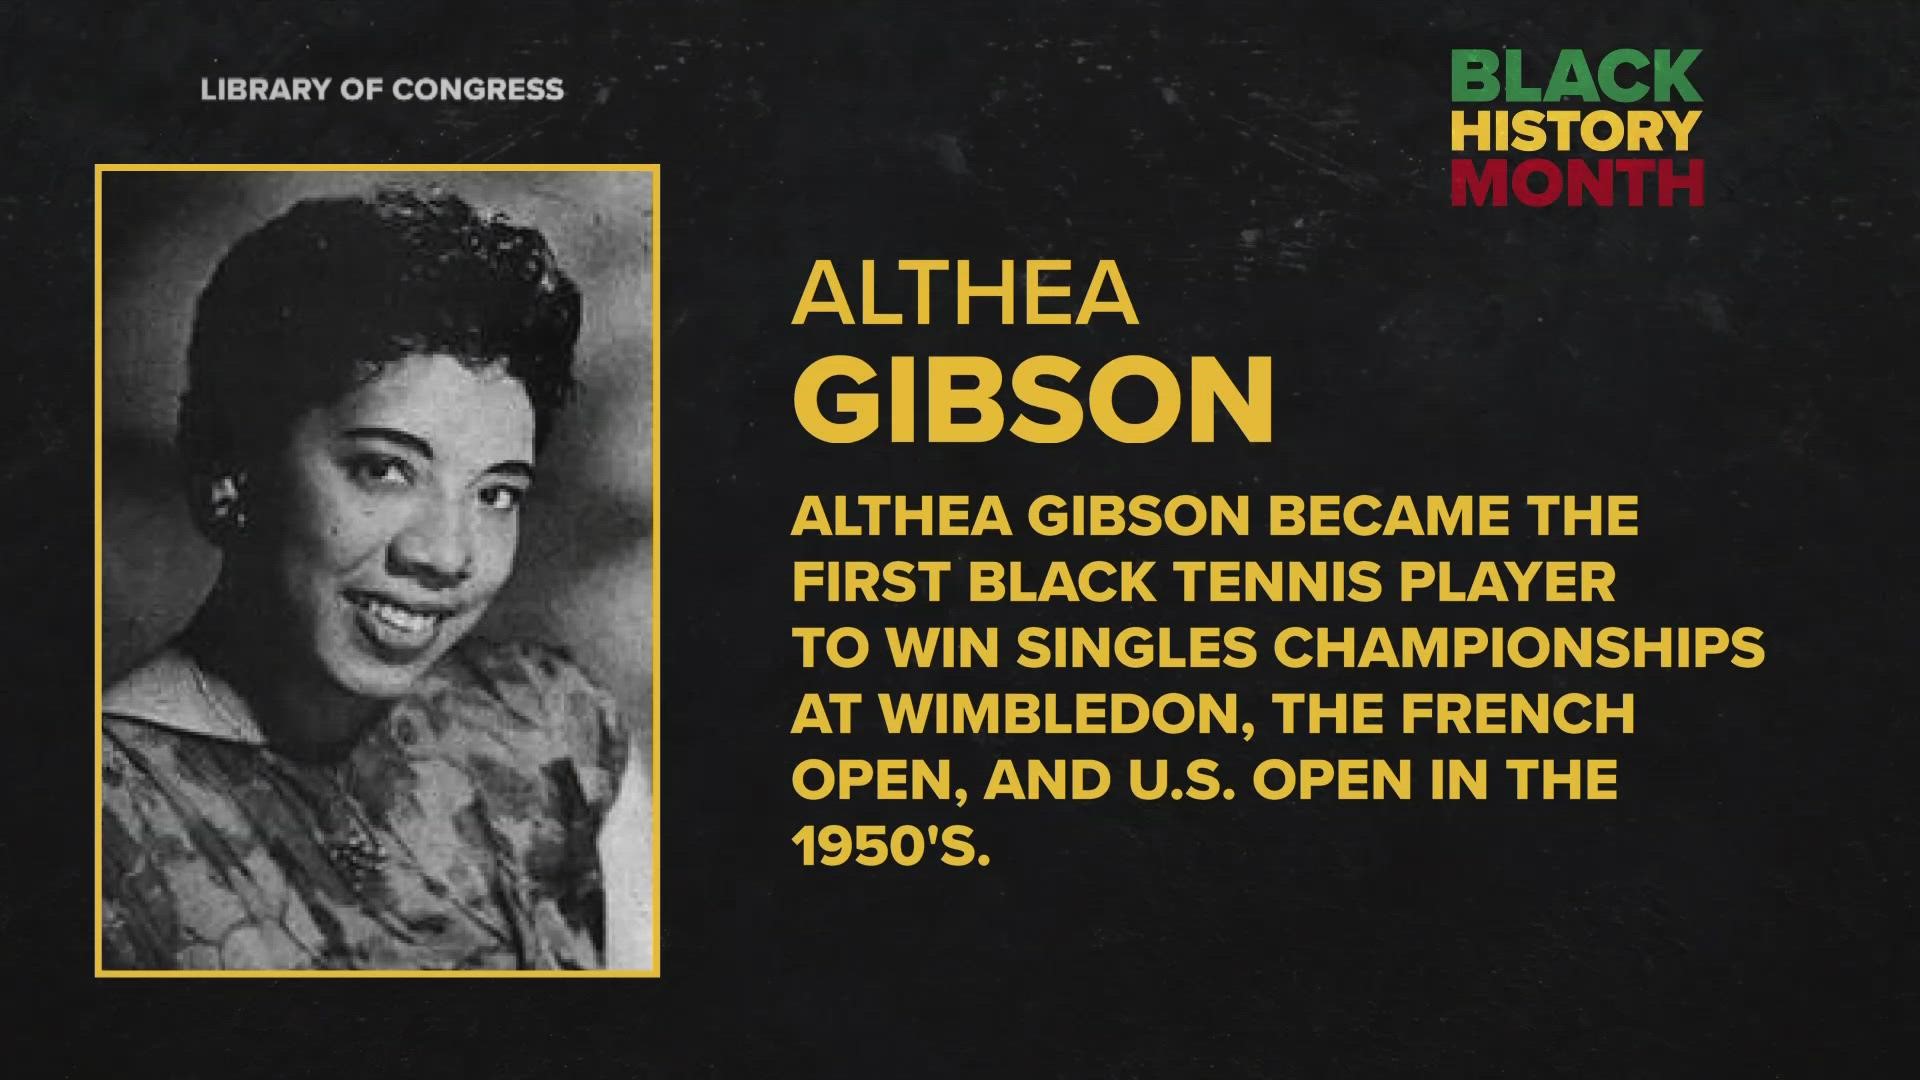 Althea Gibson broke through the sport of tennis. She was the first Black player to win the singles championship at the French Open, Wimbledon and U.S. Open.